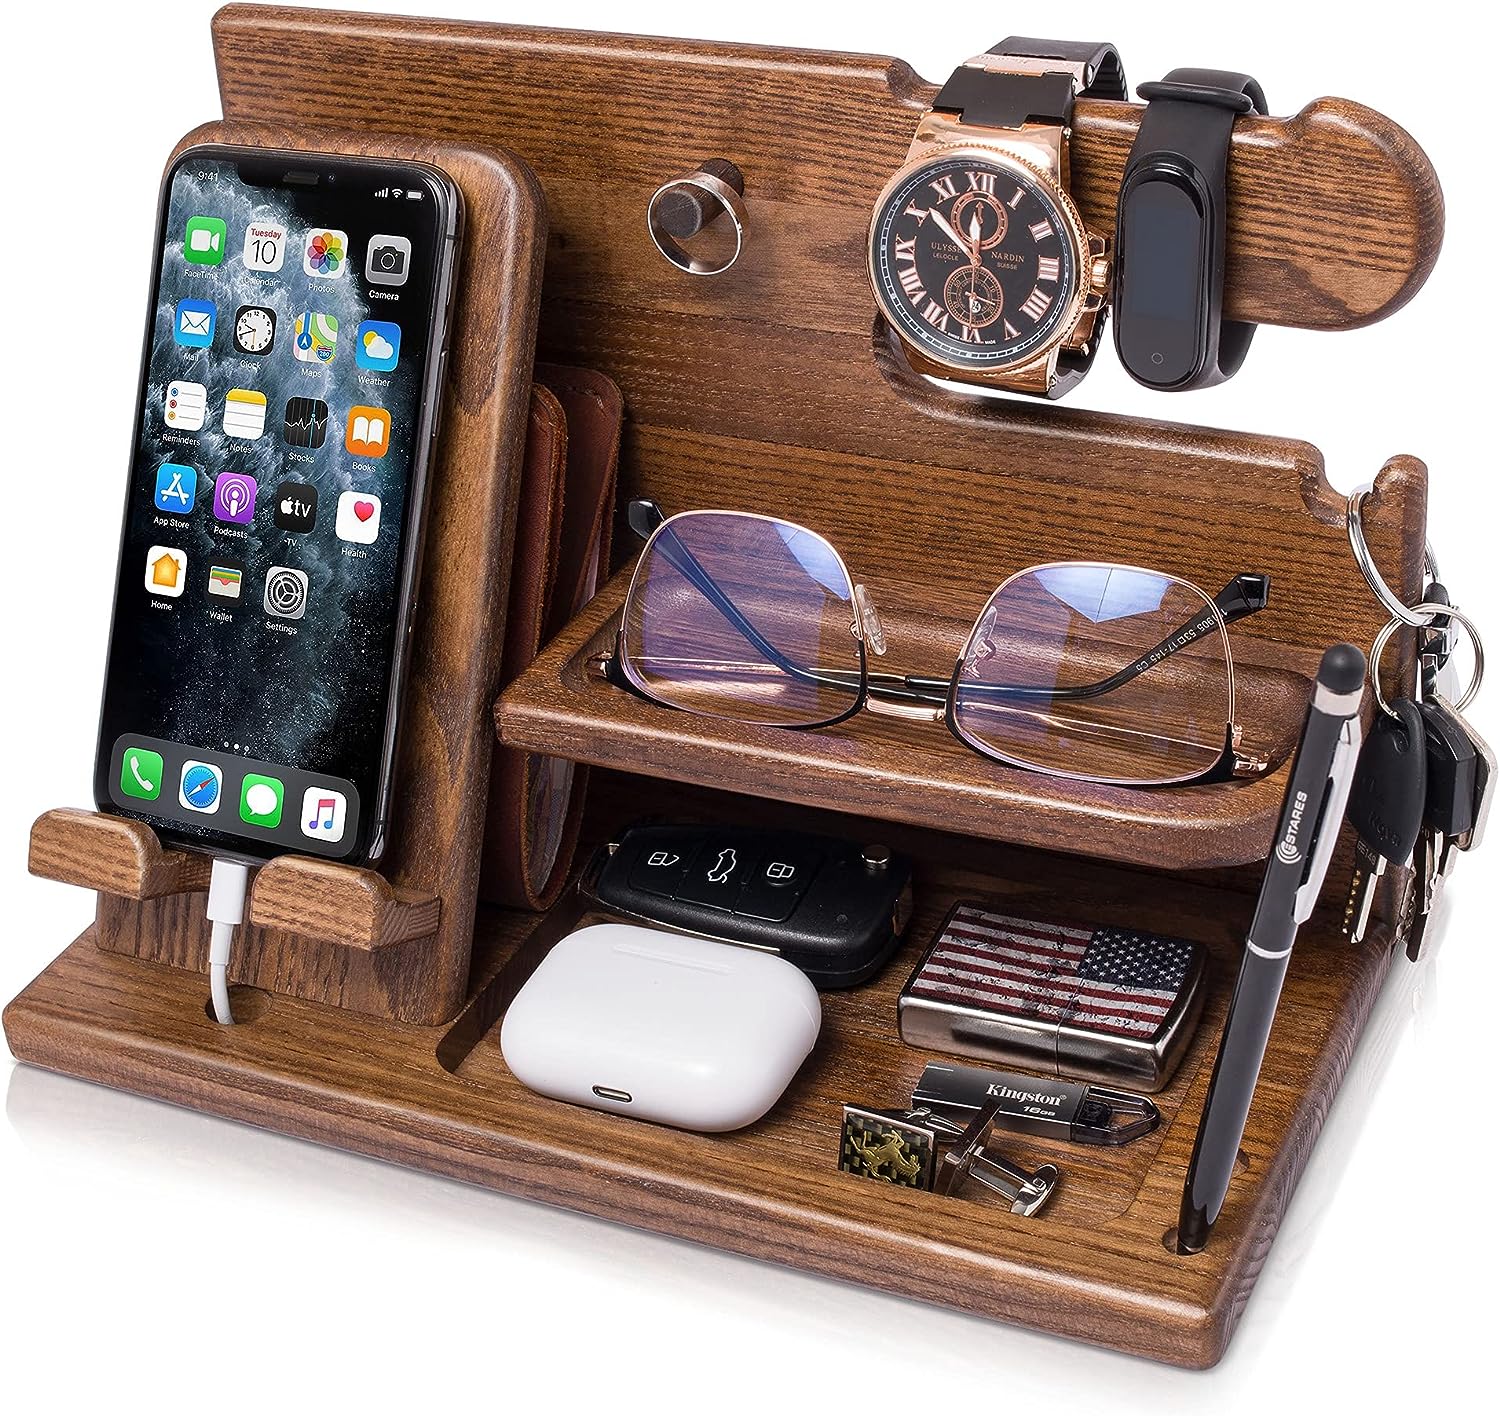 TESLYAR Gifts for Men Wood Phone Docking Station Fathers Gift Nightstand Desk Organizer Gifts for dad Gifts for him Birthday Anniversary Xmas Gifts Mens Gift Ideas Key Holder Wallet Stand (Beige)